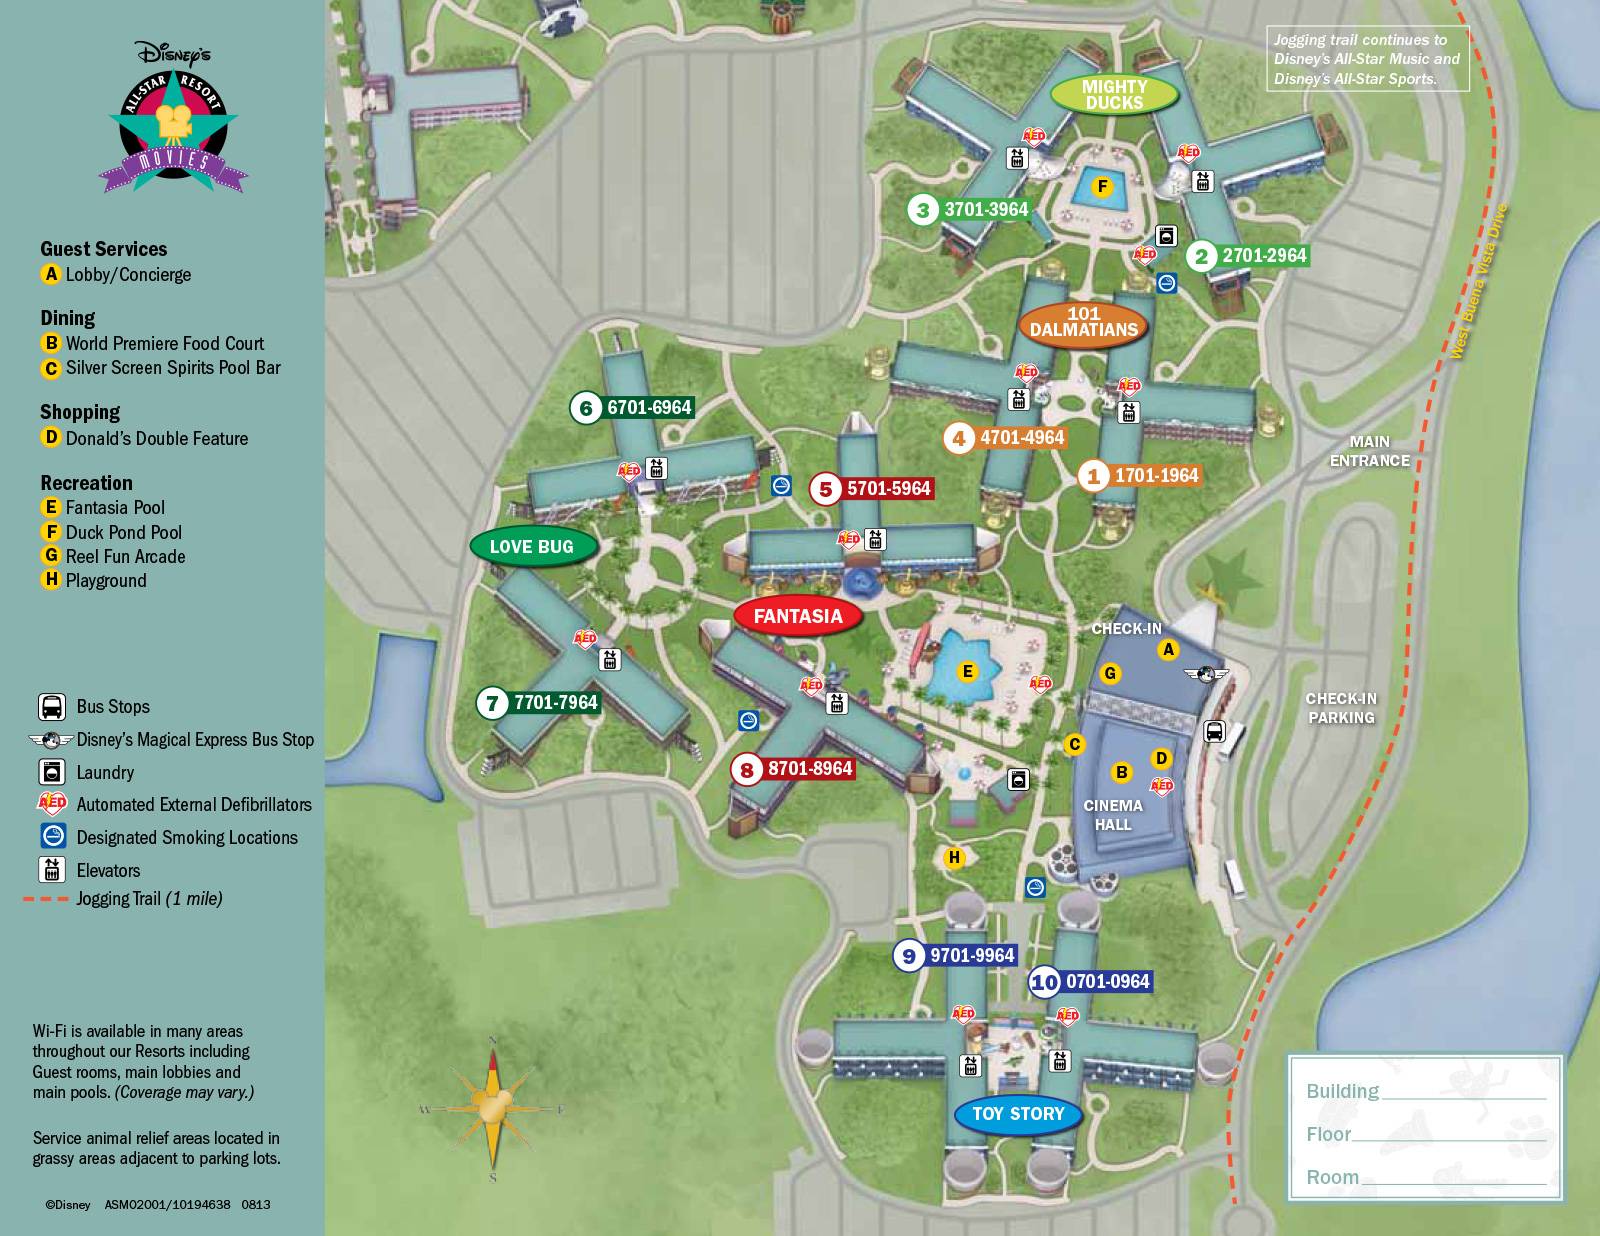 2013 All Star Movies Resort guide map